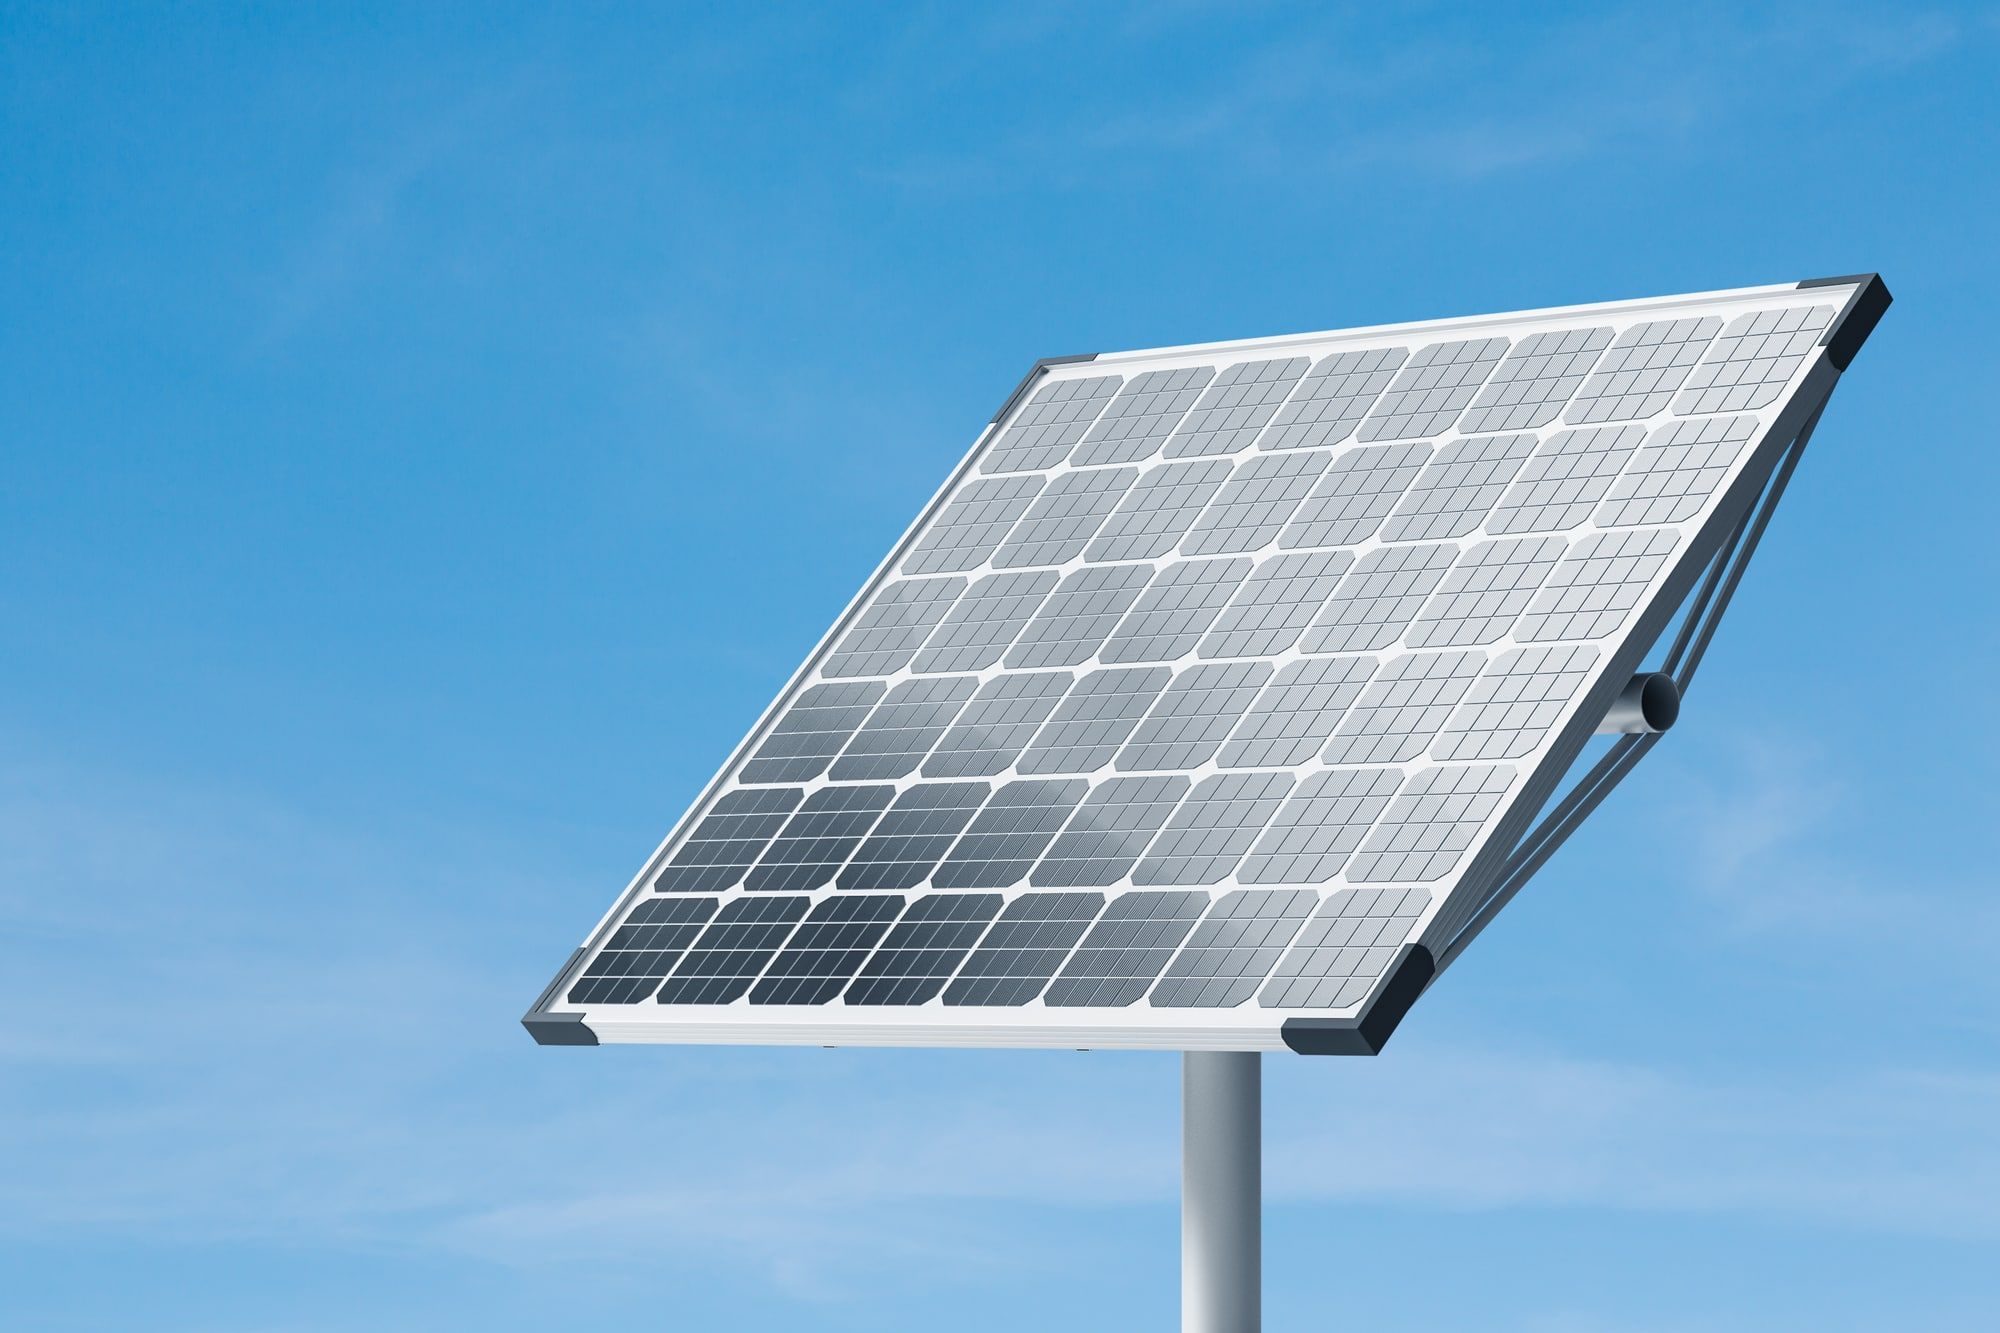 Big solar panel over blue sky background. Green energy, renewable resources and environment concept. 3d rendering mock up